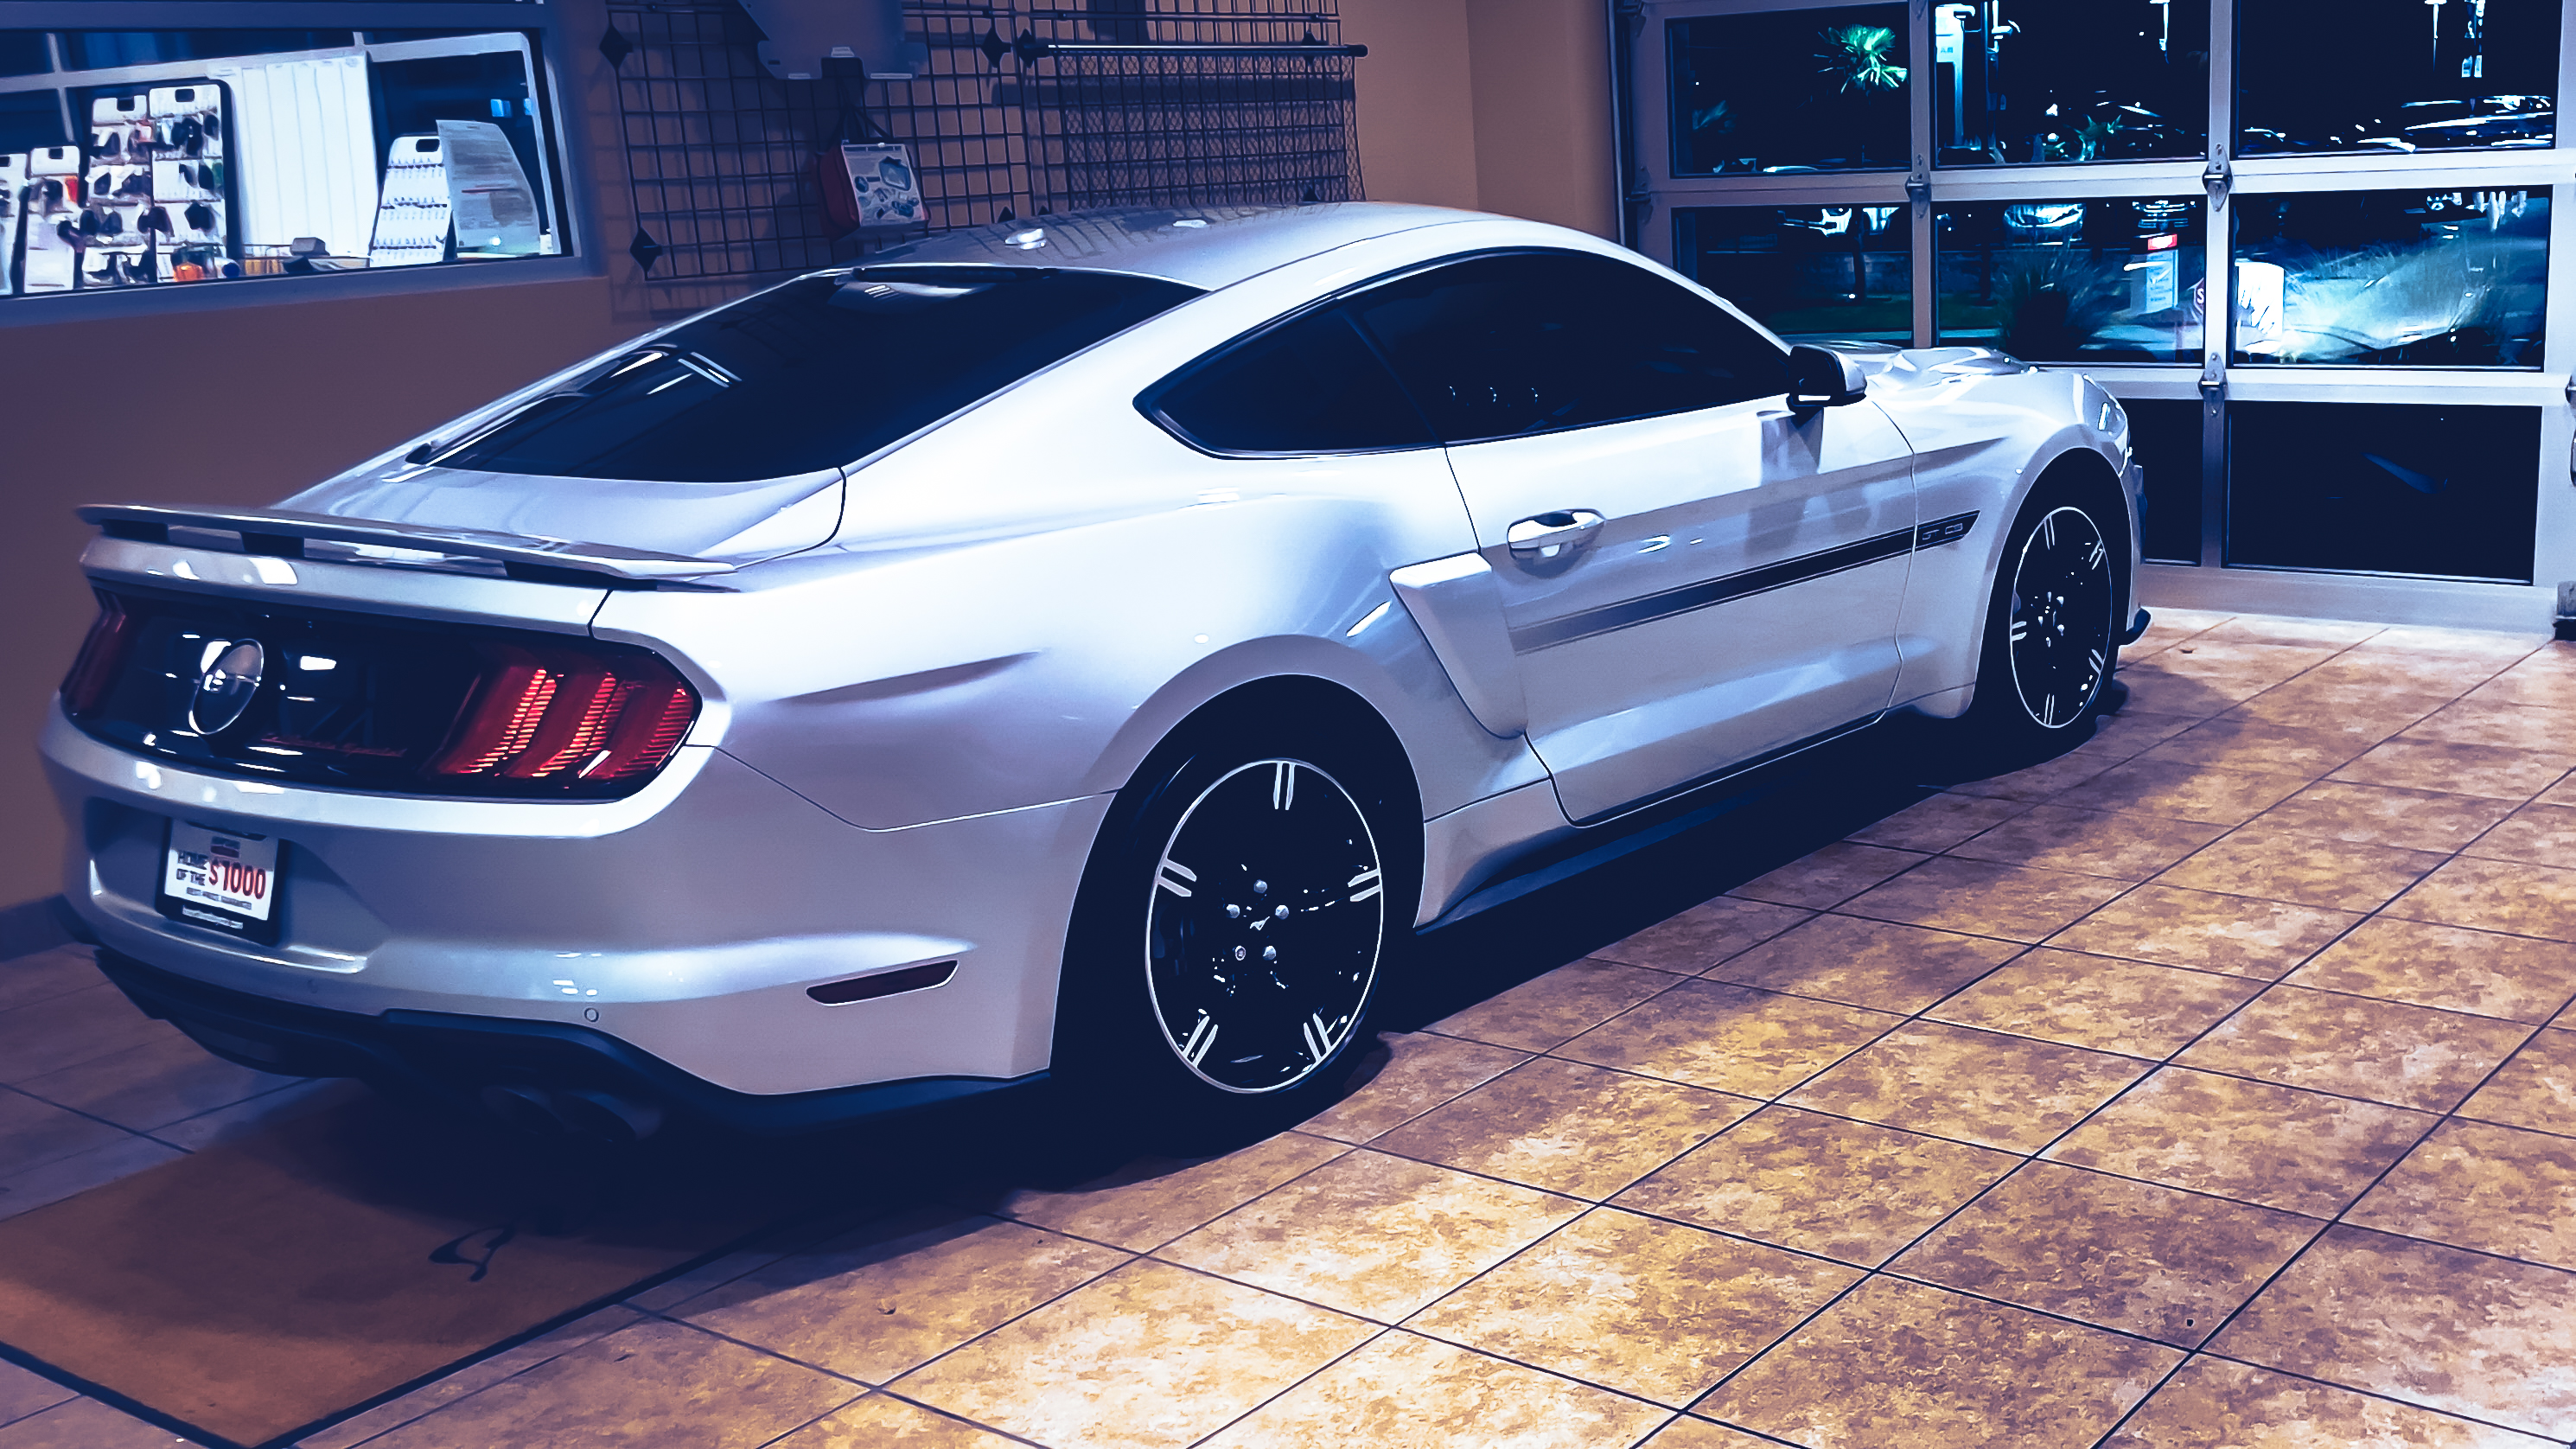 General 2980x1676 Ford Mustang car vehicle gray cars rear view